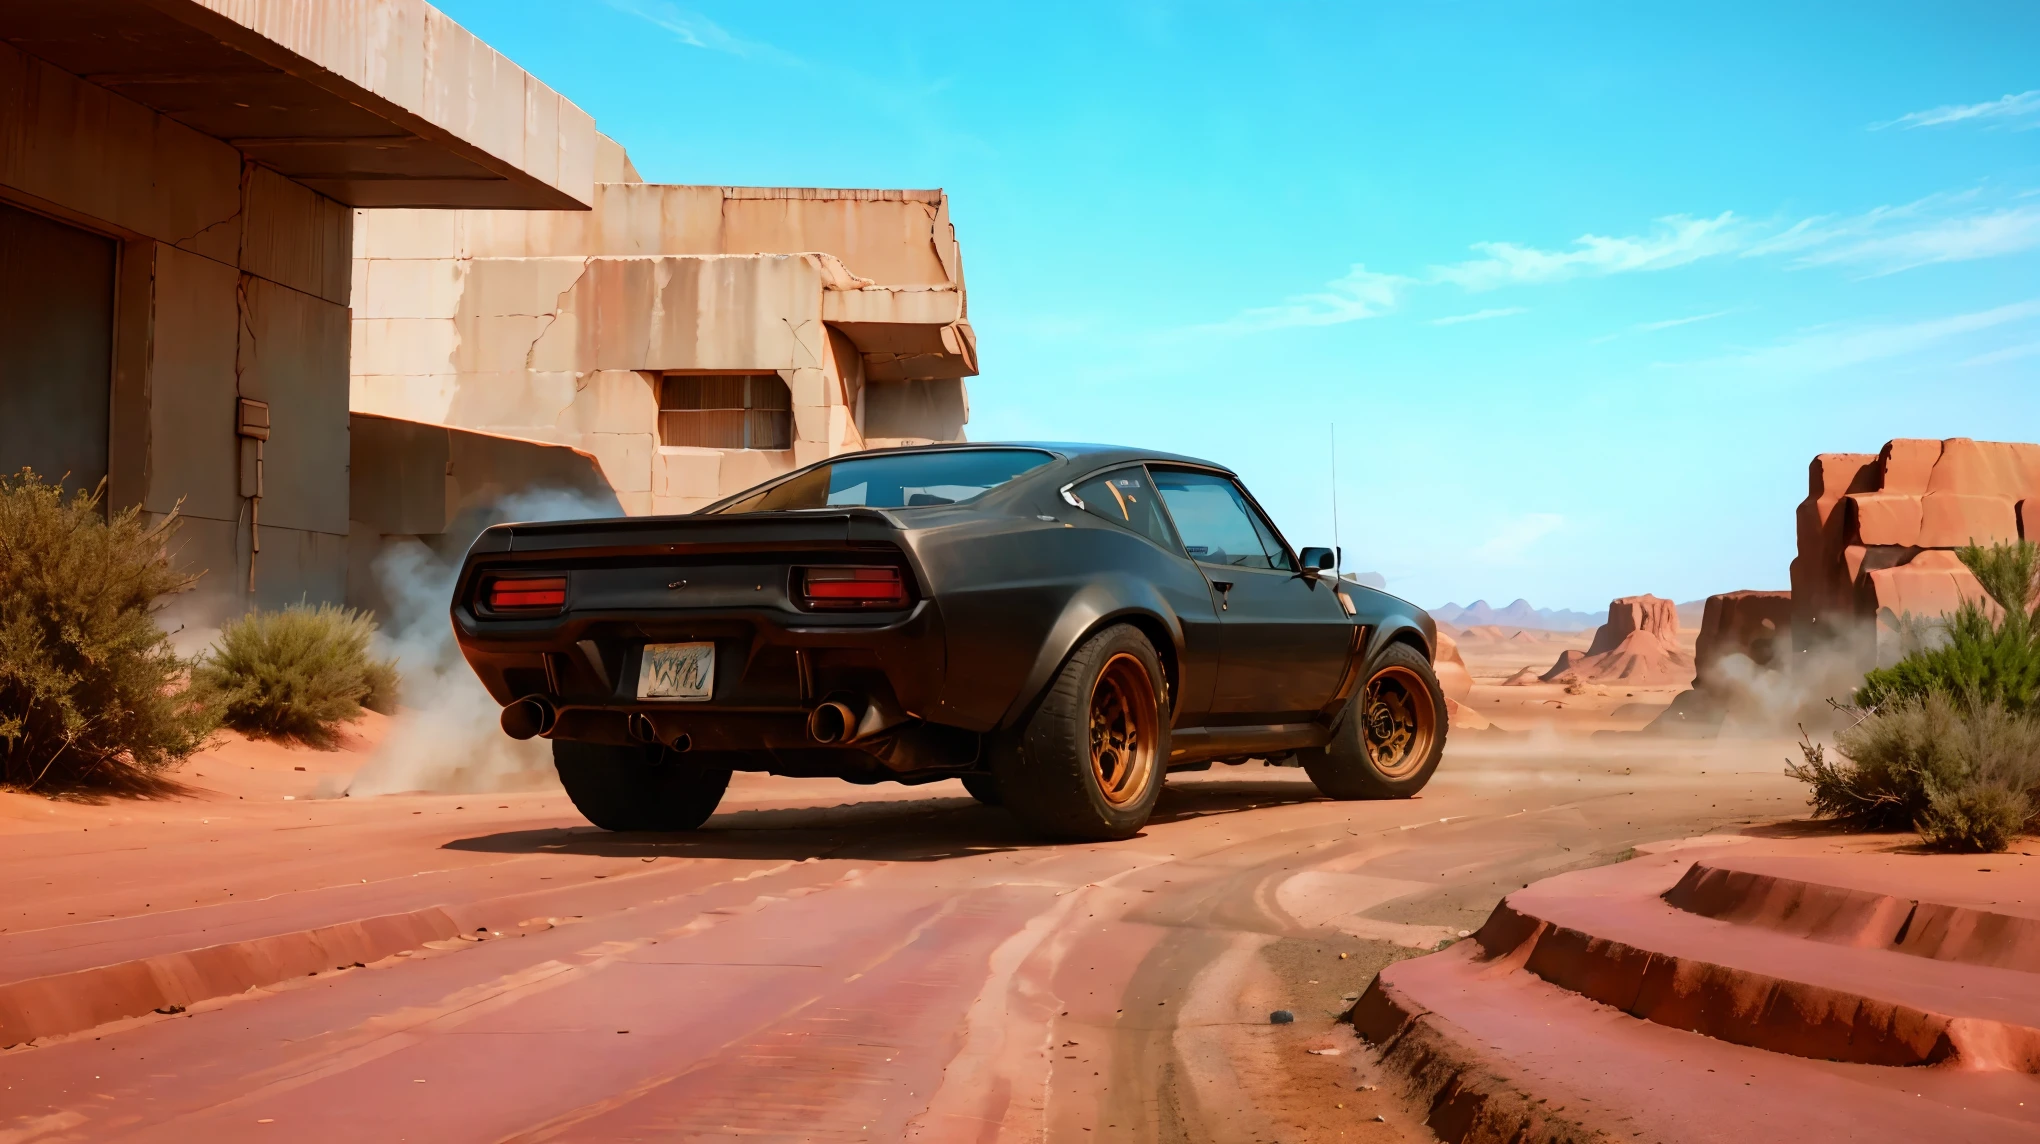 (highest quality:1.2, Very detailed, High Contrast, masterpiece:1.2, Best Quality, Best aesthetics), Mad Max, Ford Falcon XB, ((Black coloring)), V8 Interceptor, supercharger, Equipped with twin overhead cams, A jet-black special pursuit vehicle tuned up to 600 horsepower., Running in the wilderness, Sand Dust, Dynamic Angle, Cinema lighting, Dynamic light and shadow,High resolution, Sharp focus, Speed, Uplifting, Rich colors, beautiful, Correct perspective, background blur taste,